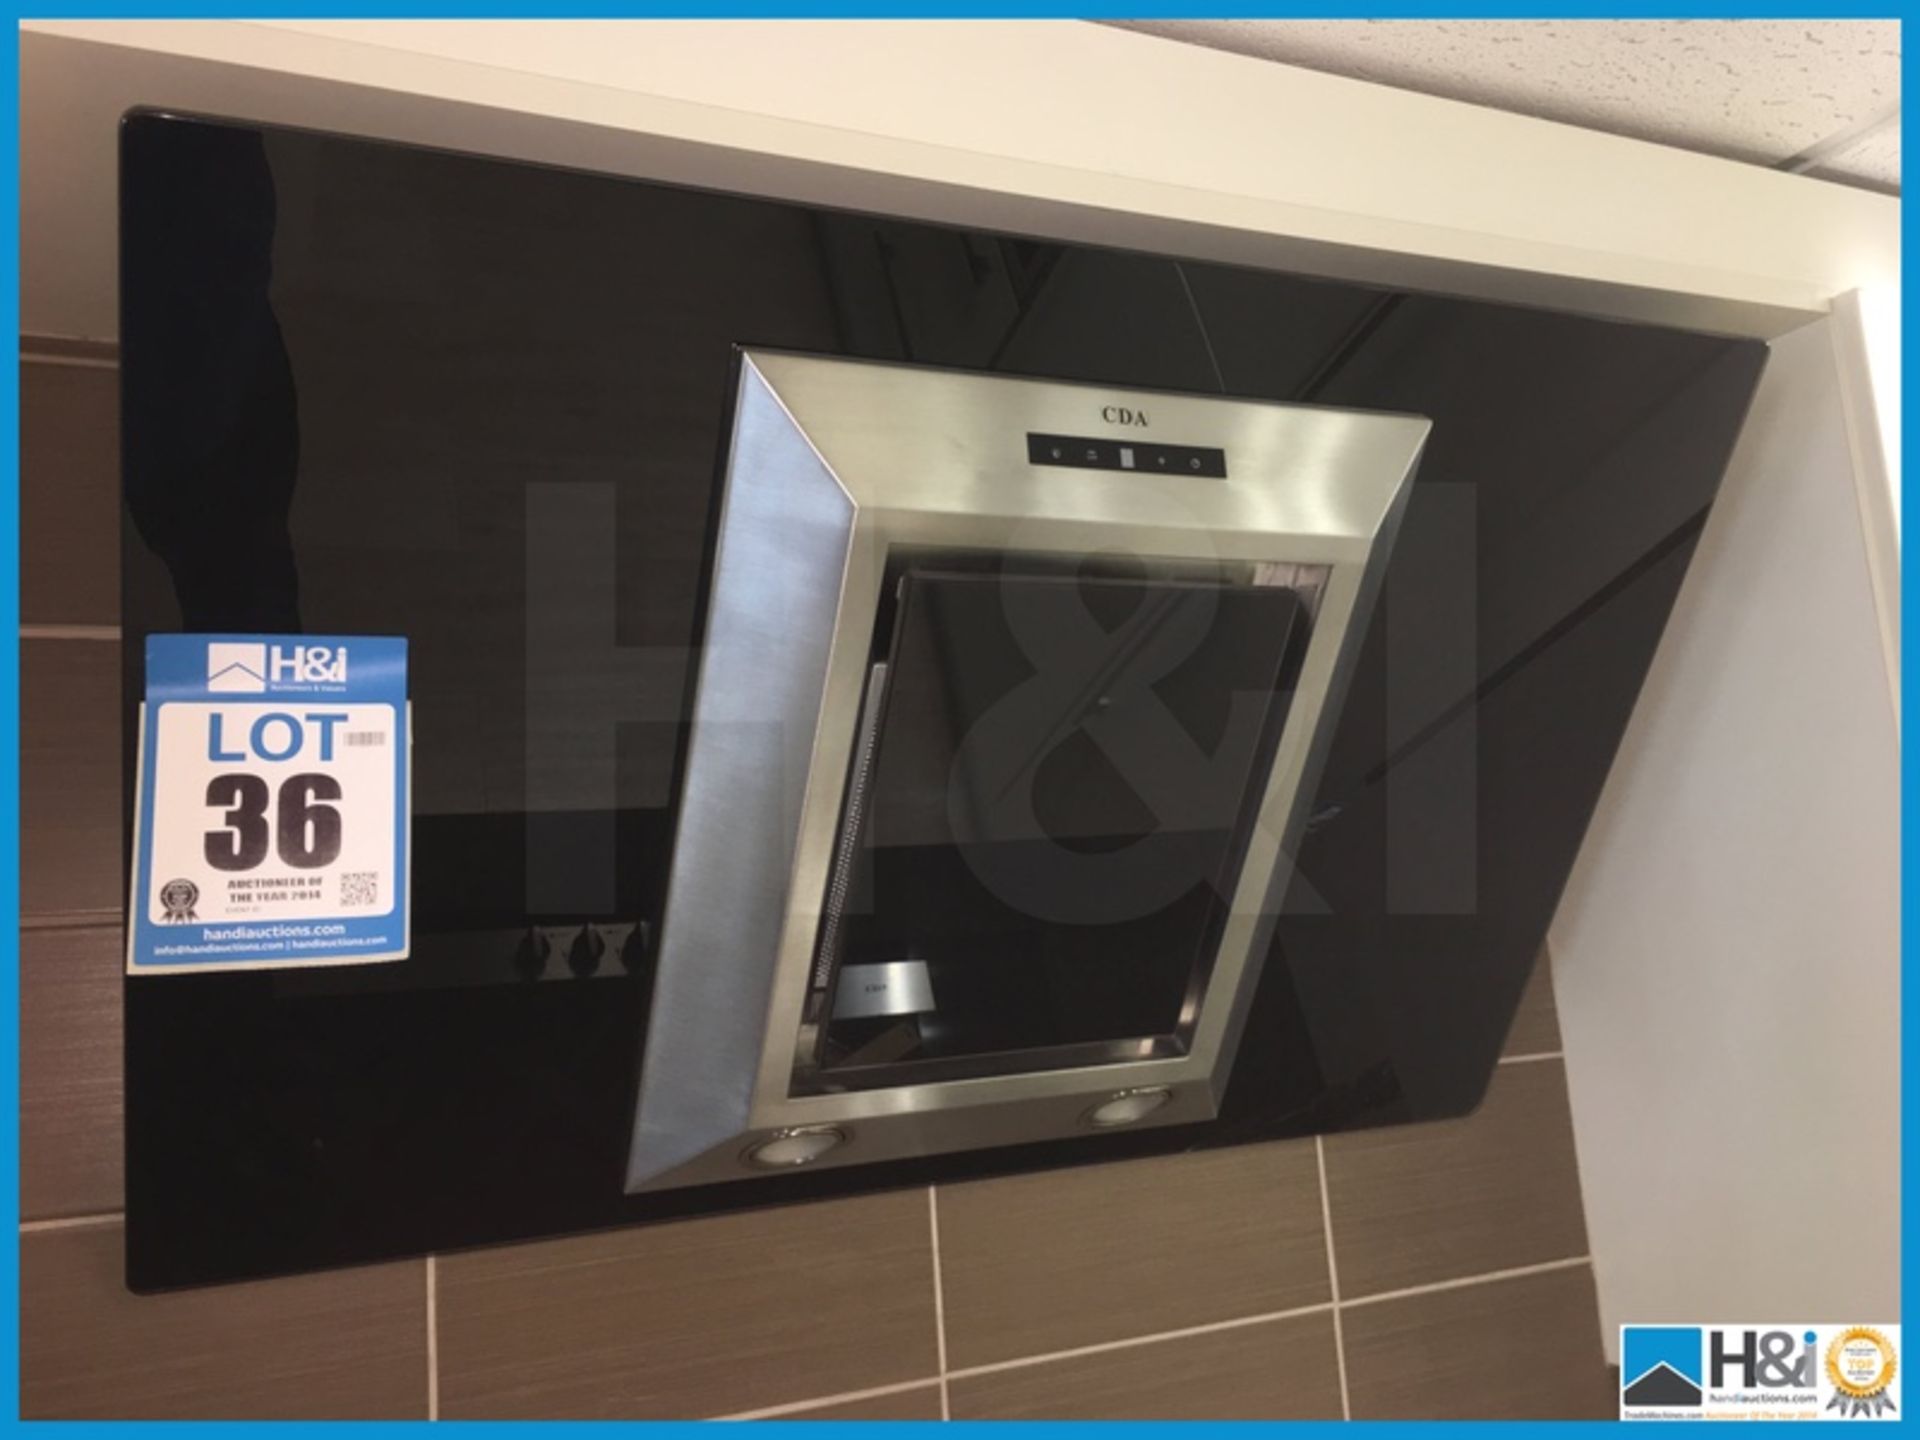 CDA stainless steel and black glass electric extractor hood with integrated lighting. 900mm